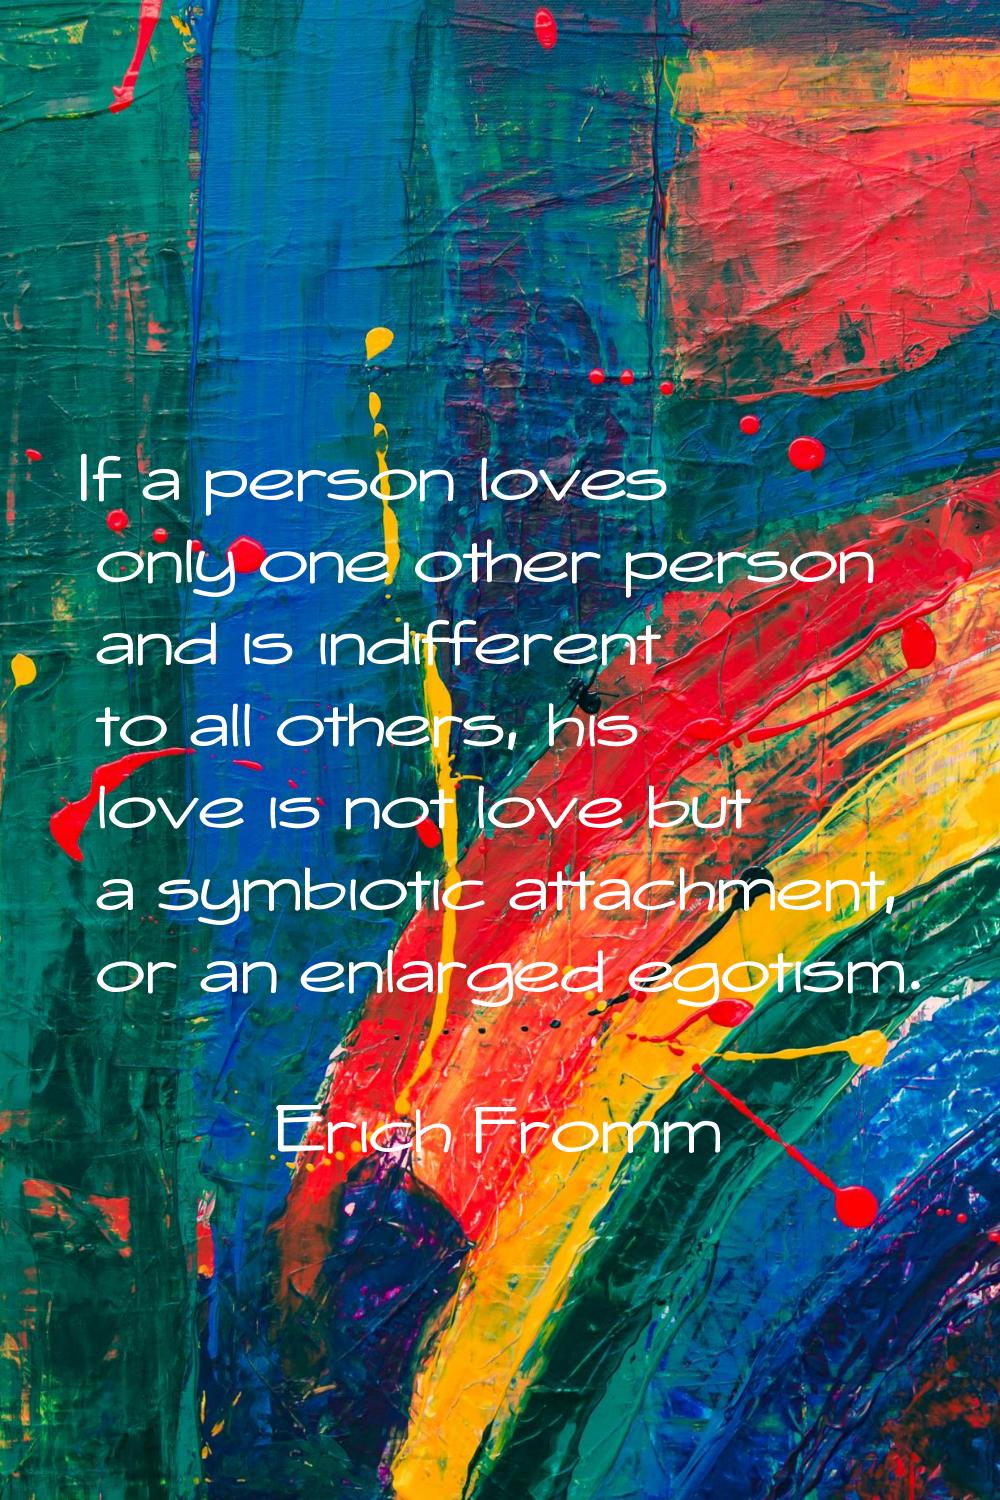 If a person loves only one other person and is indifferent to all others, his love is not love but 